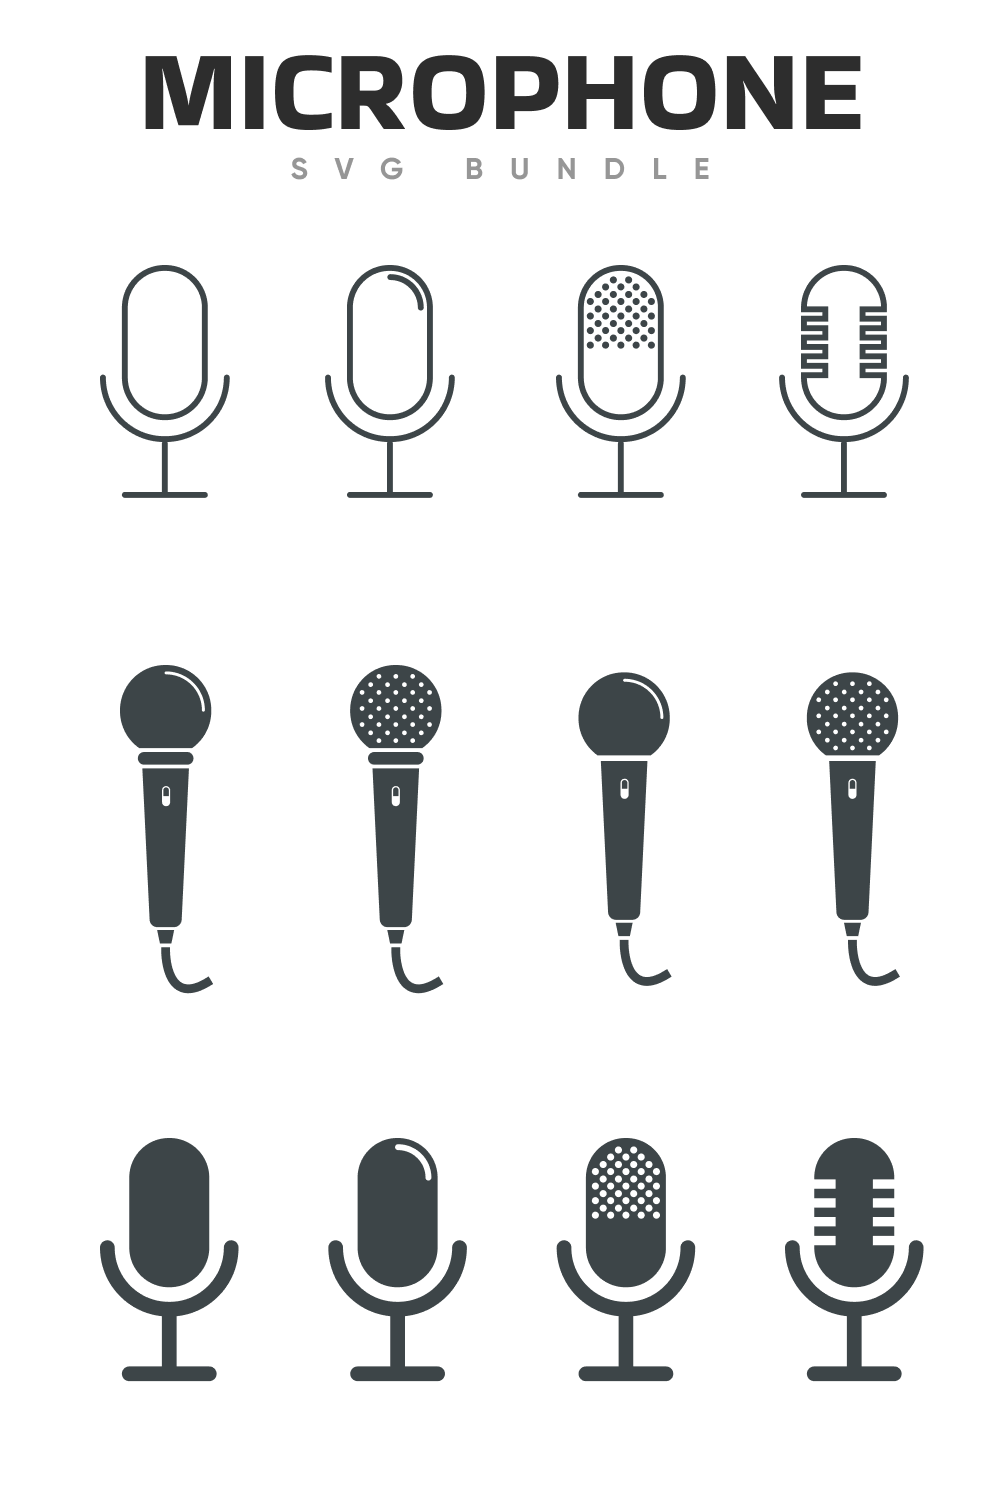 Some microphones types.